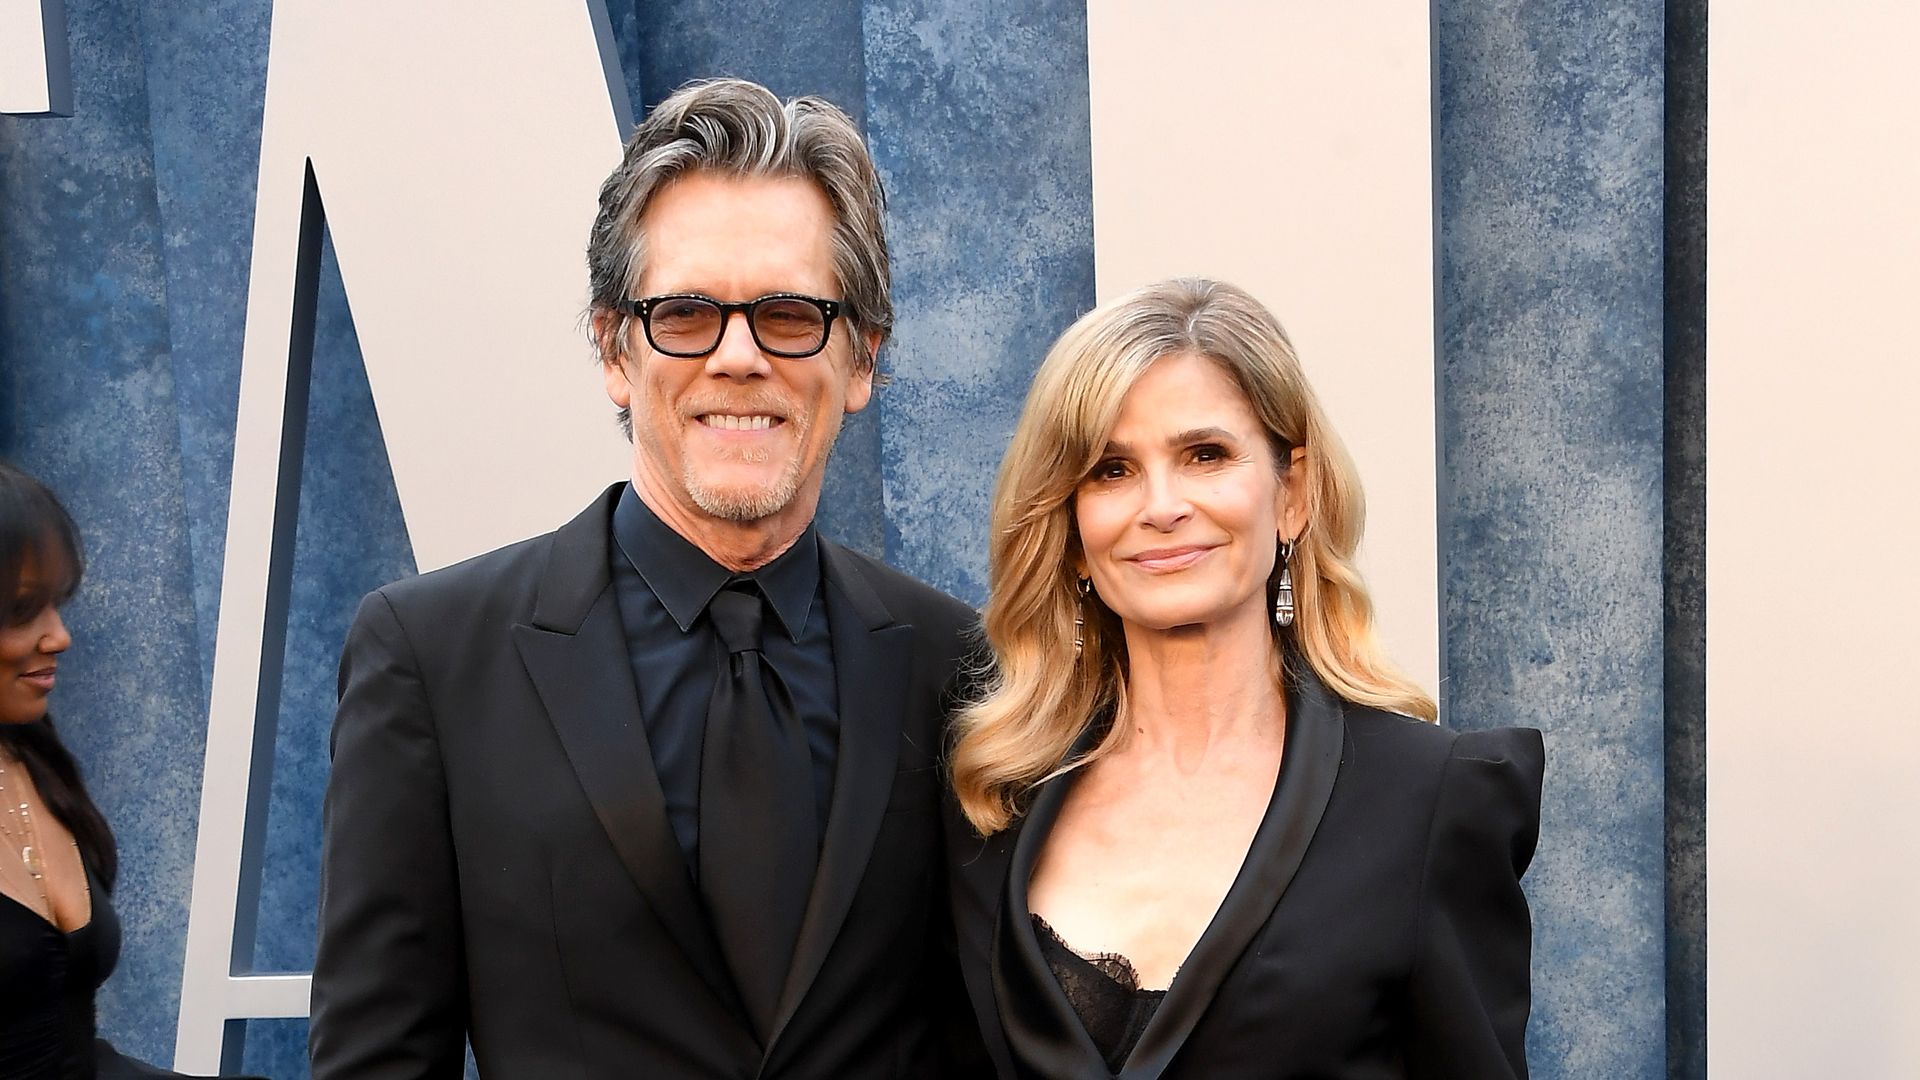 Kevin Bacon and Kyra Sedgwick joined by kids Travis and Sosie with rarely-seen partners for surprise that sparks reaction